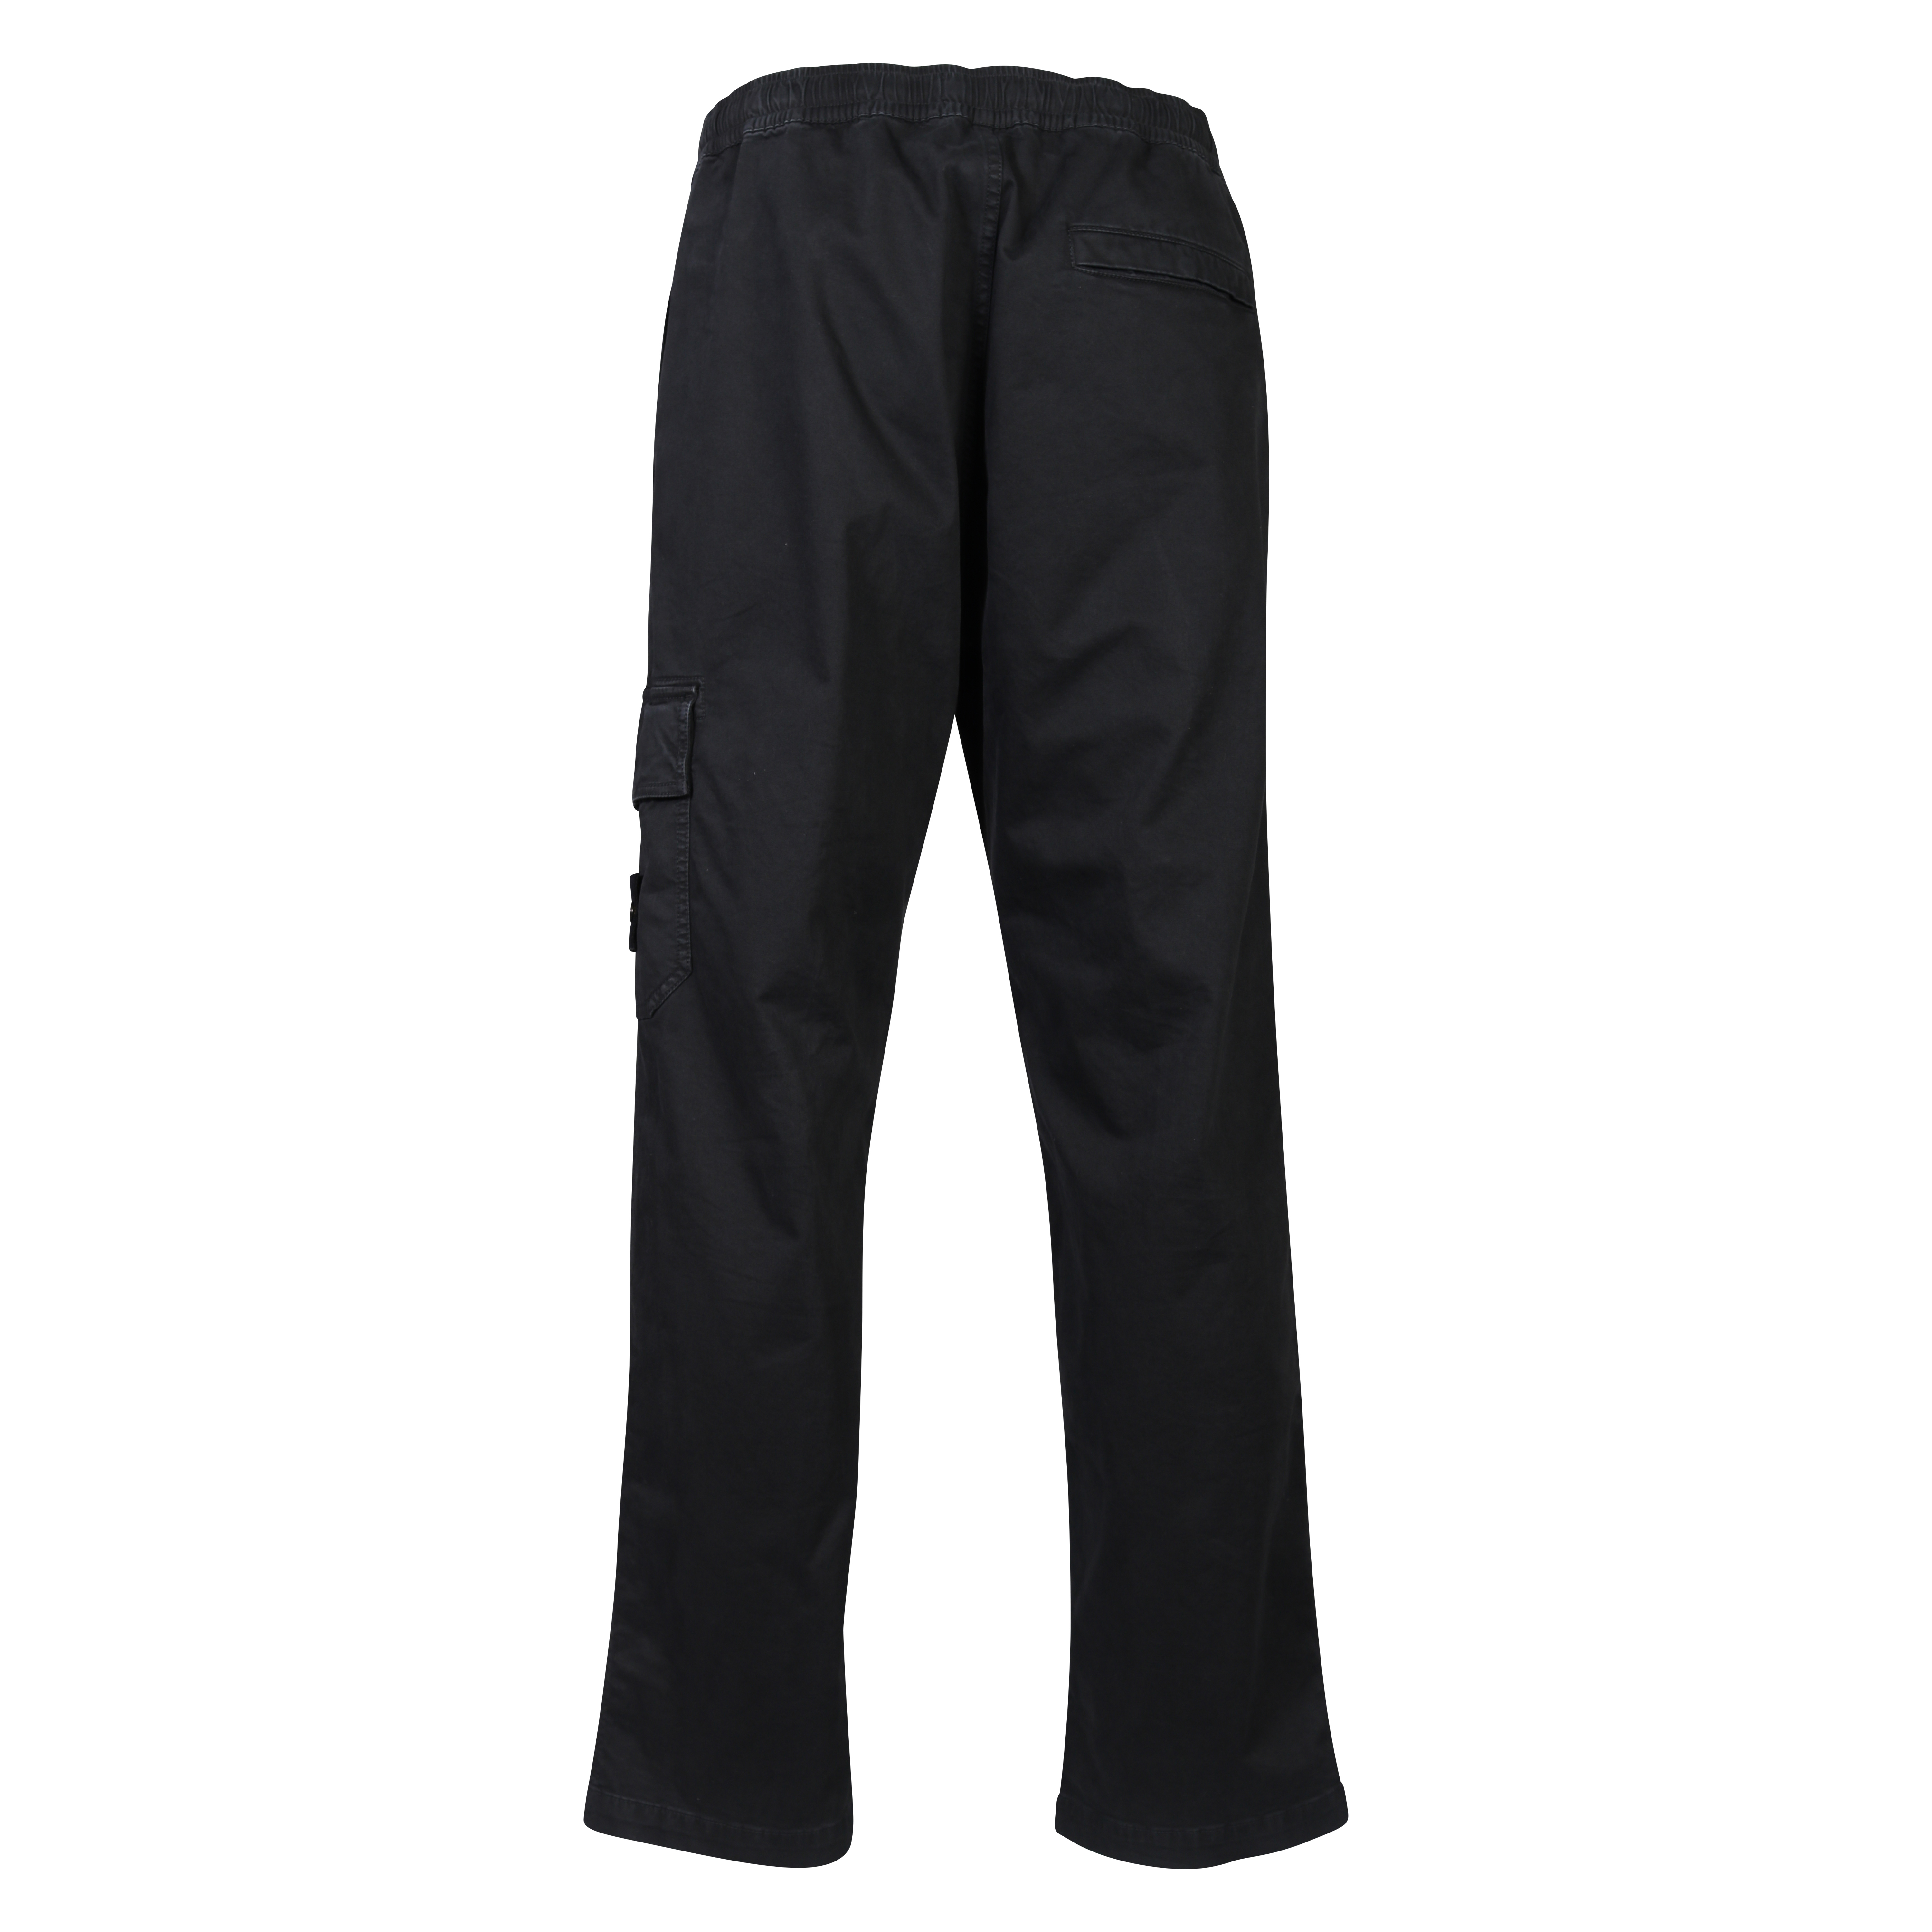 STONE ISLAND Loose Cargo Pant in Black Washed 38